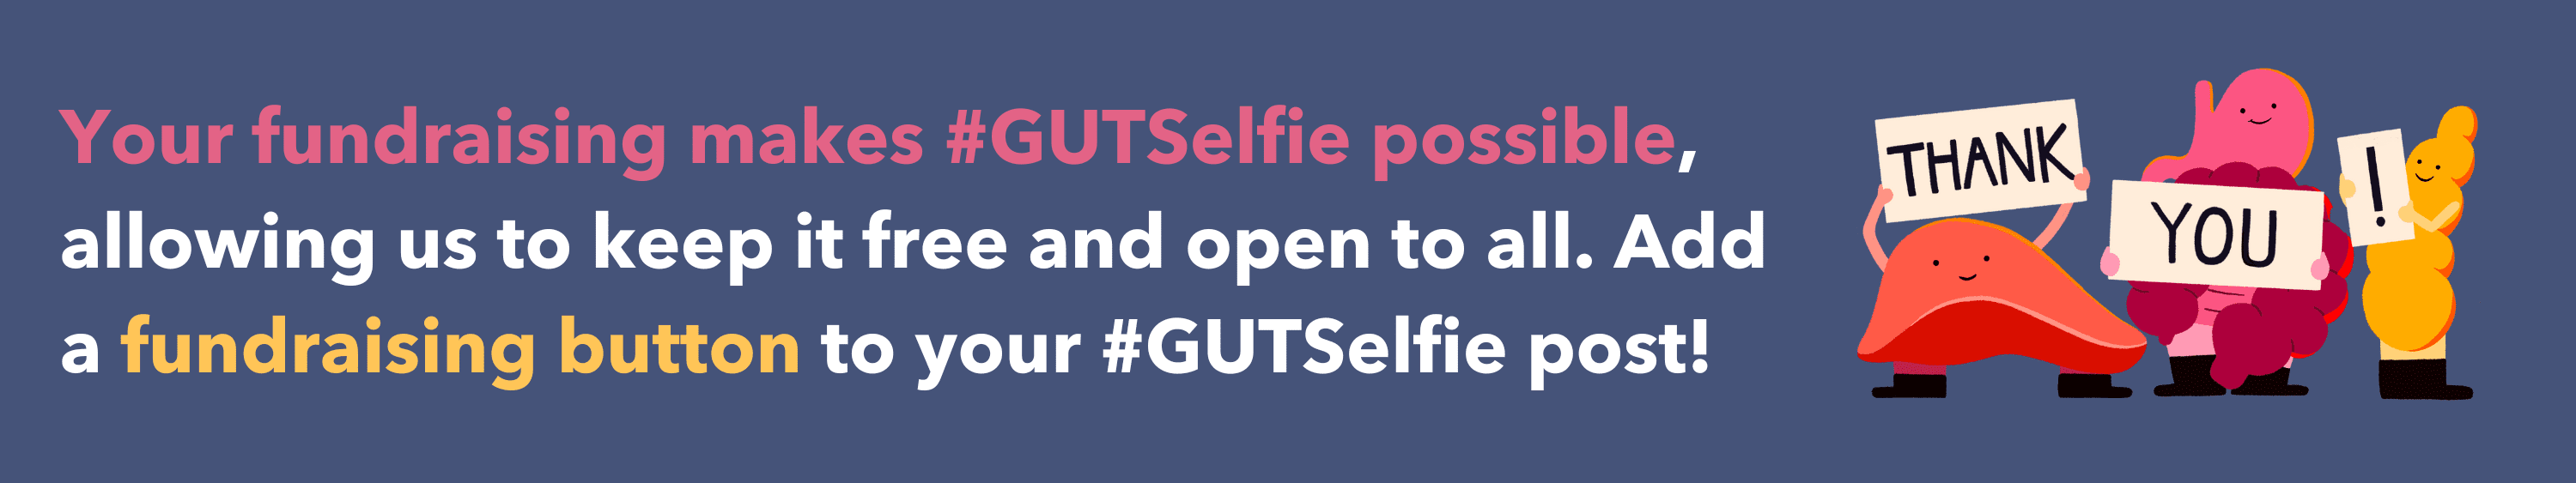 Your fundraising makes #GUTSelfie possible, allowing us to keep it free and open to all. Add a fundraising button to your #GUTSelfie post!